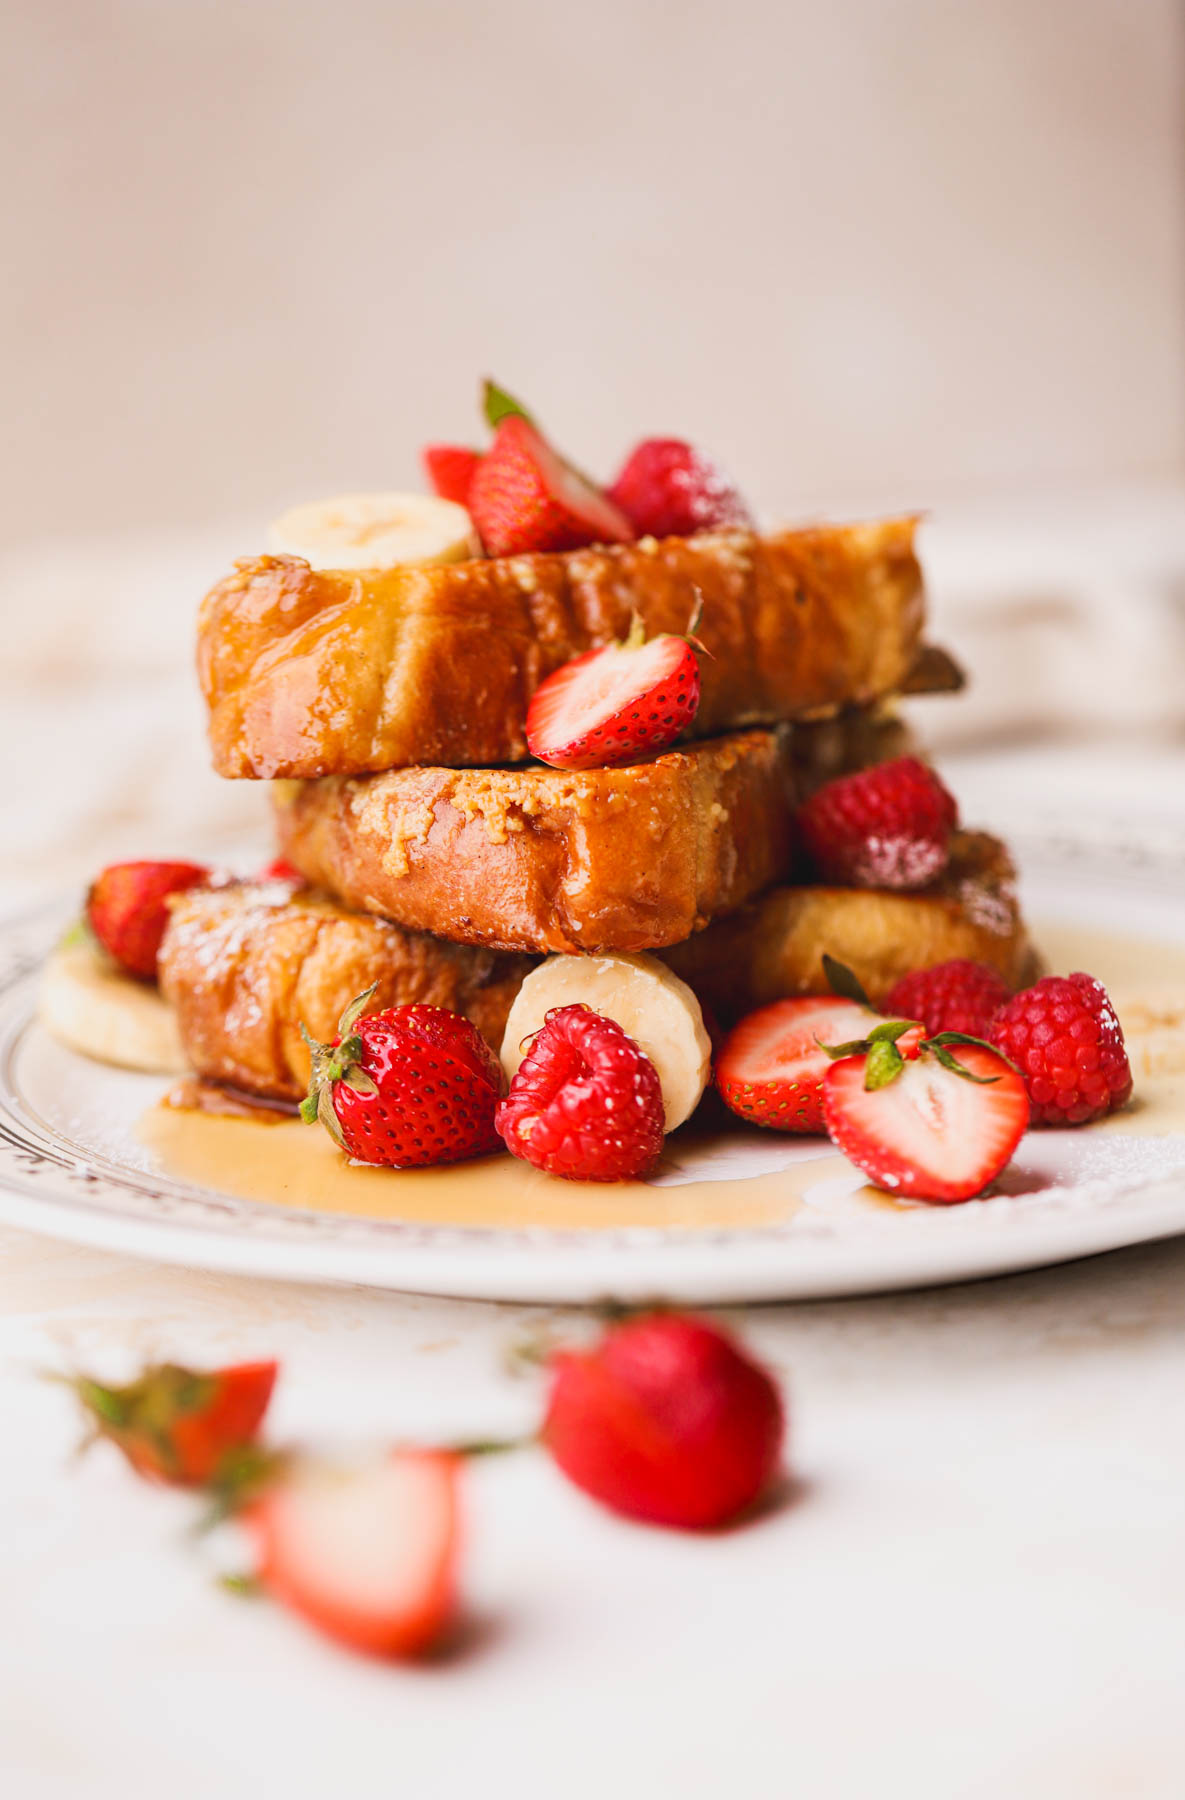 Crispy custard French toast drizzled with maple syrup and fresh fruit.